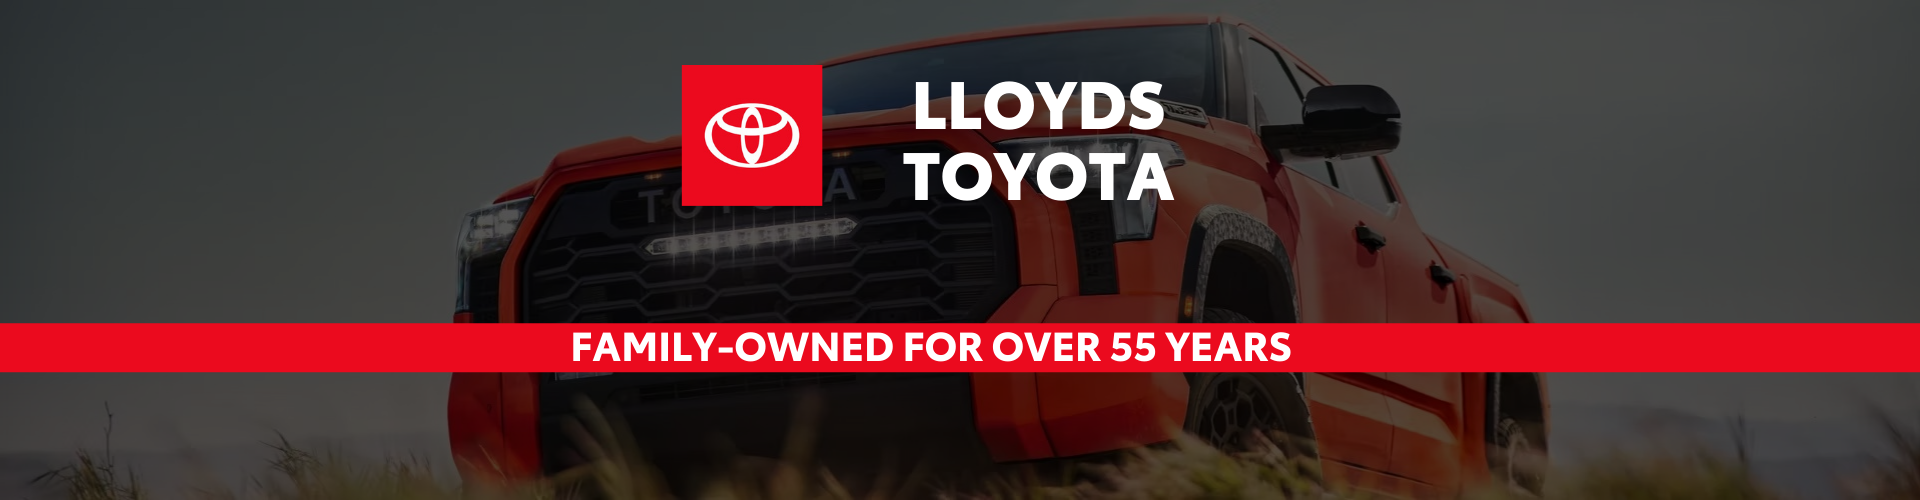 Lloyds Toyota Family Owned